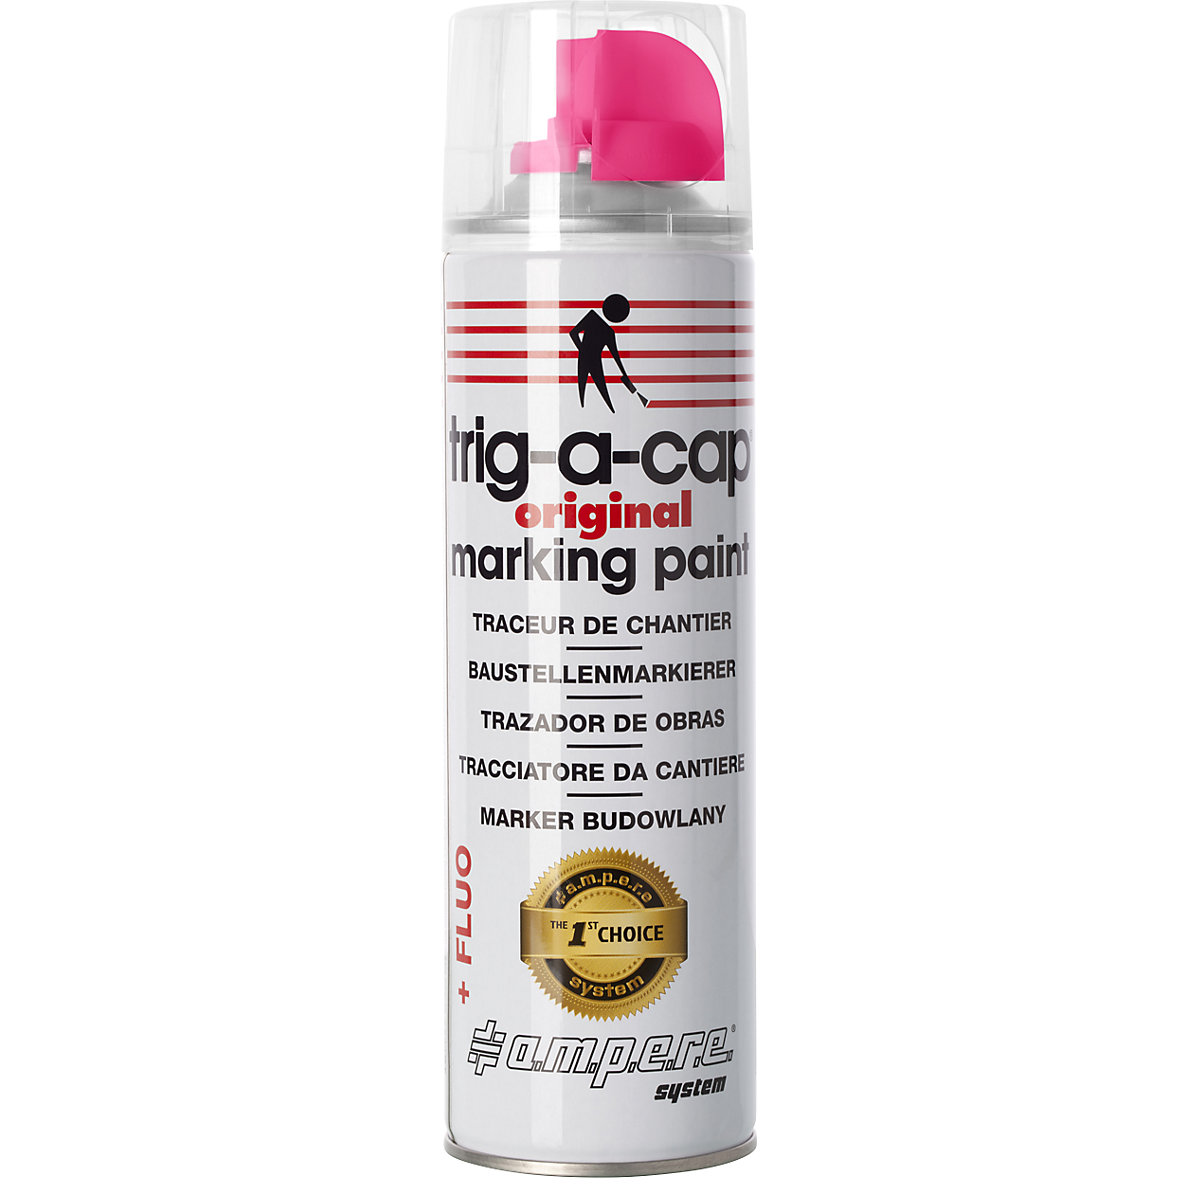 Construction site marking spray – Ampere, content 500 ml, solvent-based, pack of 12 cans, pink fluo-6